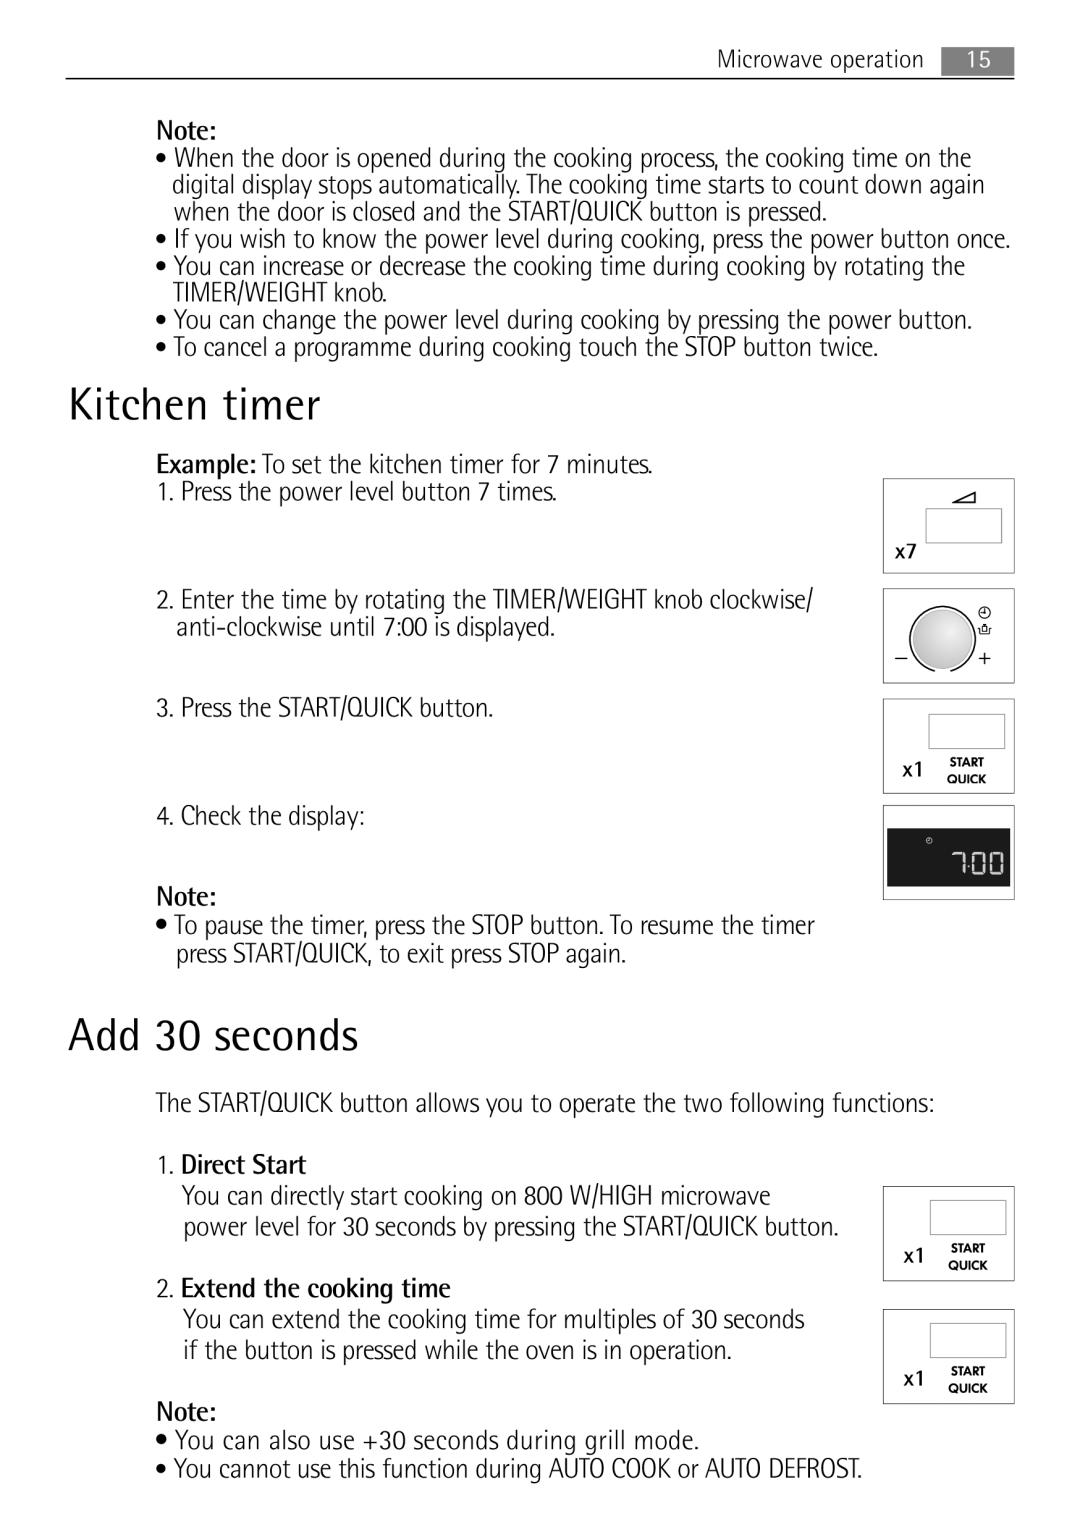 Electrolux MCD1752E, MCD1762E user manual Kitchen timer, Add 30 seconds, Direct Start, Extend the cooking time 